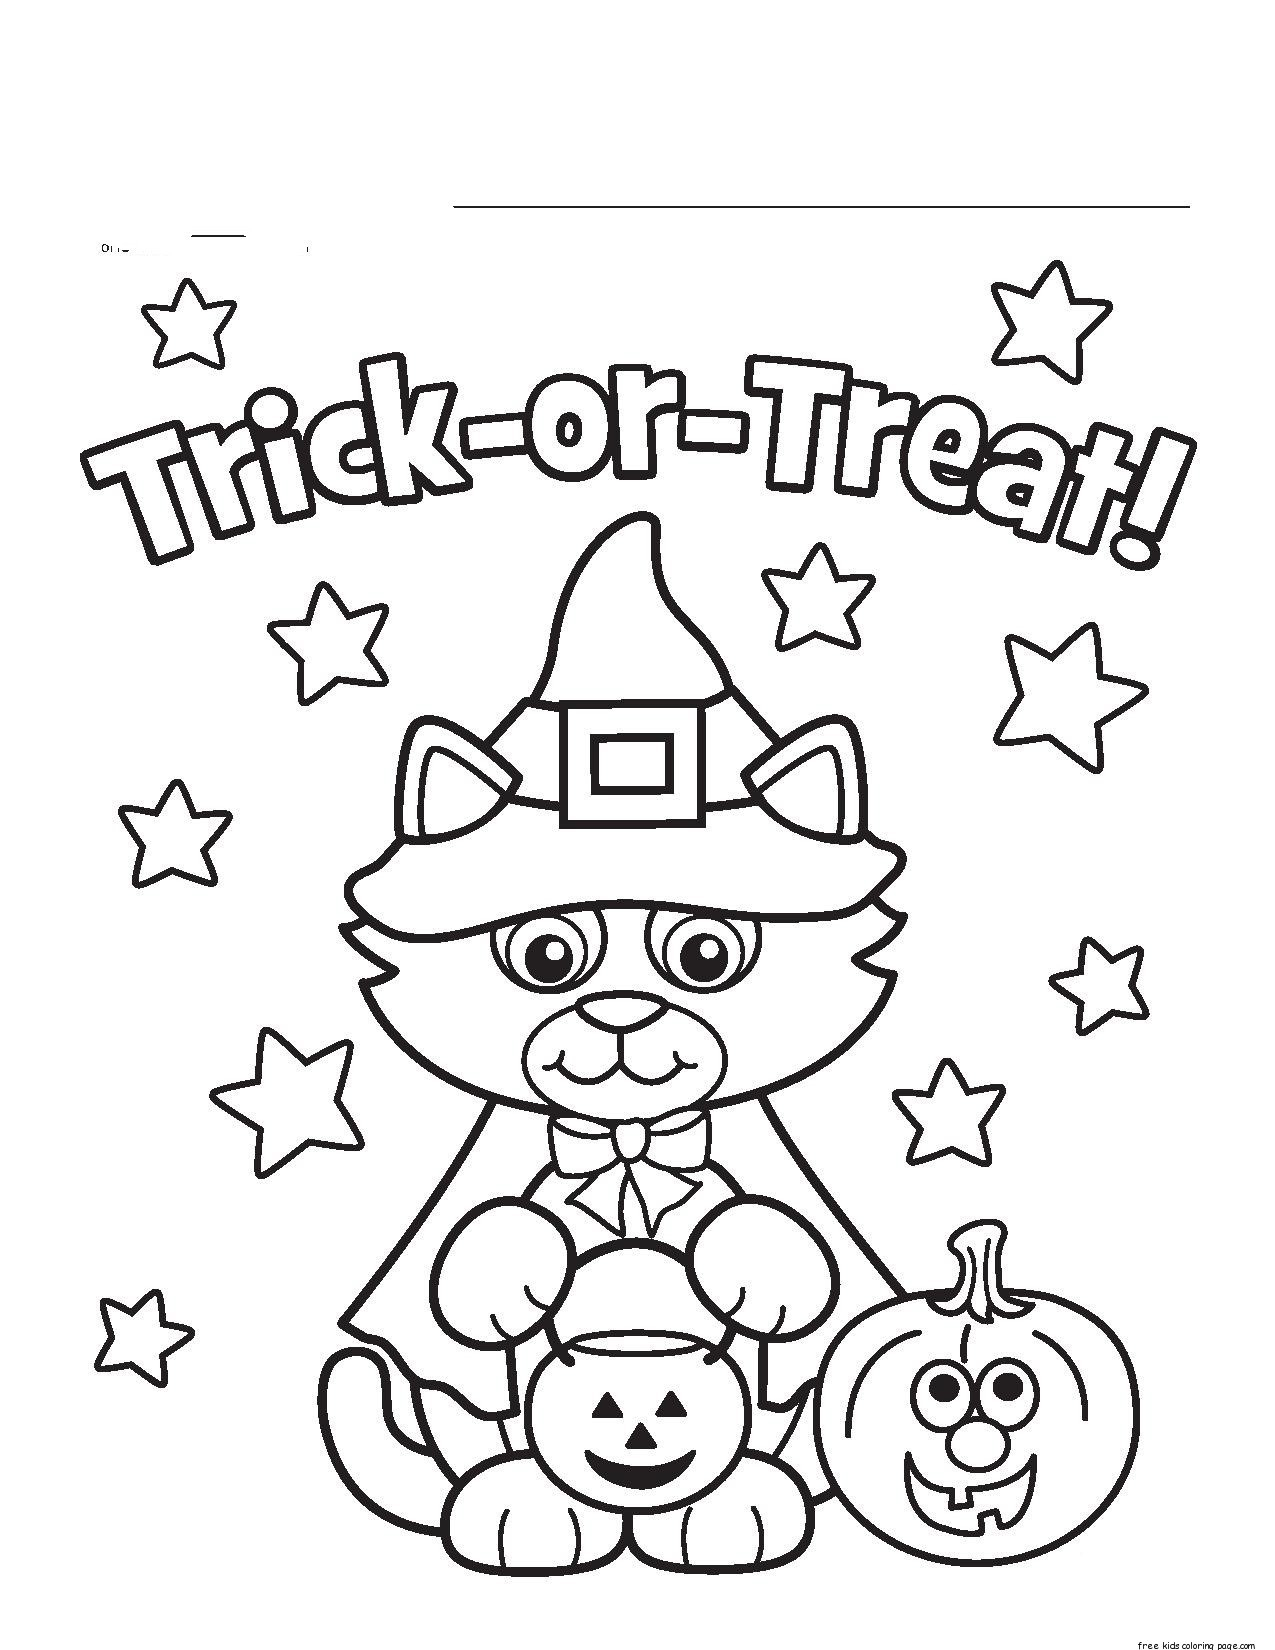 Printable Halloween Coloring Pages For Children Free